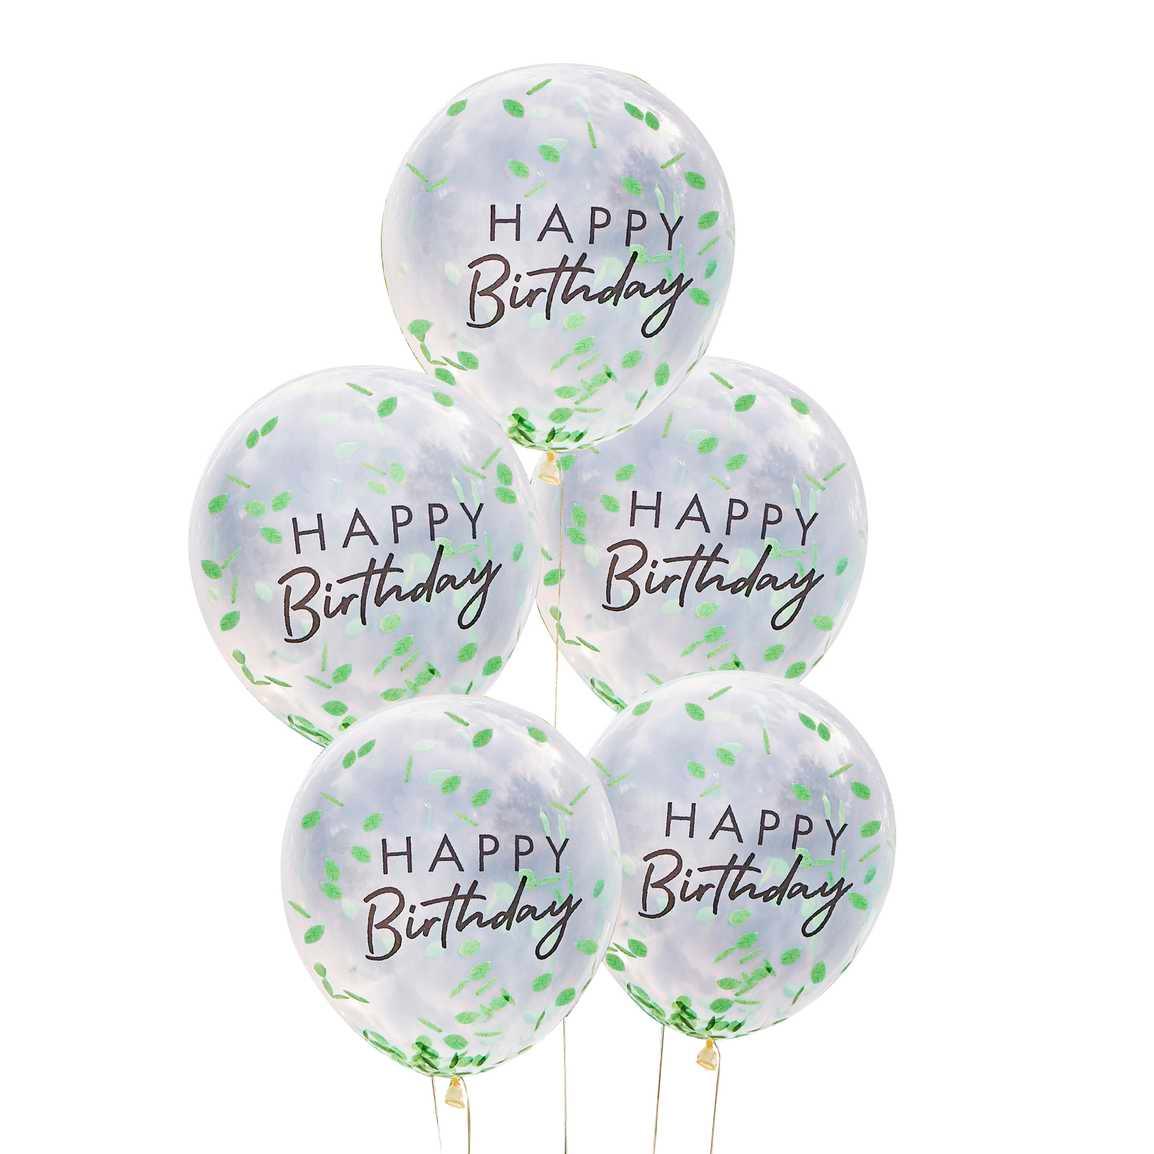 Happy Birthday Leaf Confetti Balloons 5pk - The Party Room